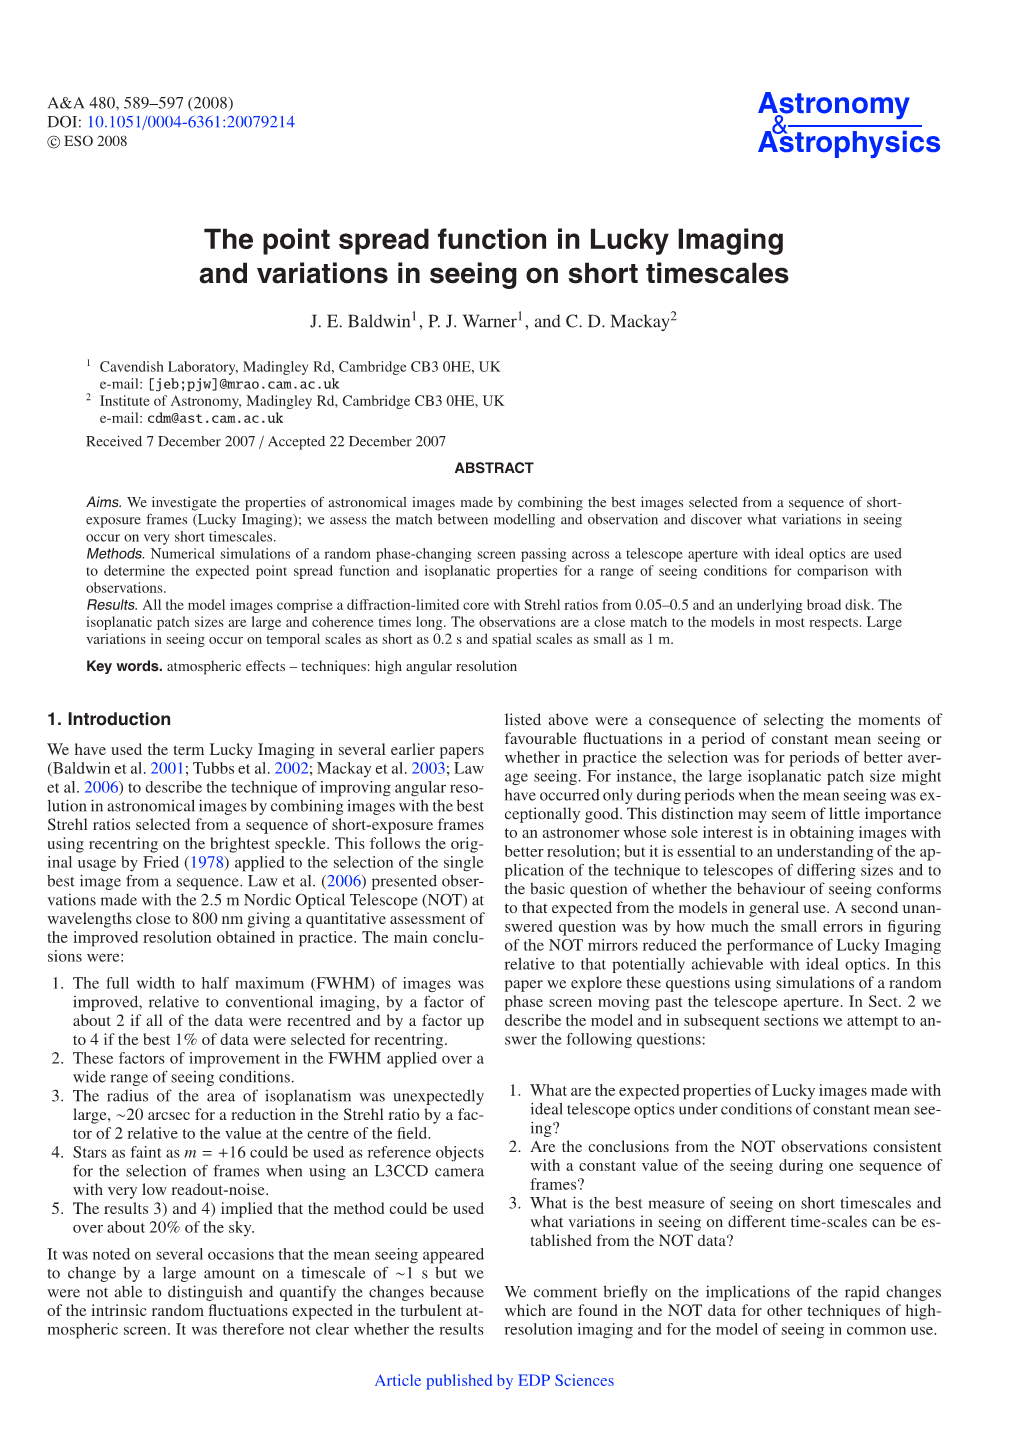 The Point Spread Function in Lucky Imaging and Variations in Seeing on Short Timescales